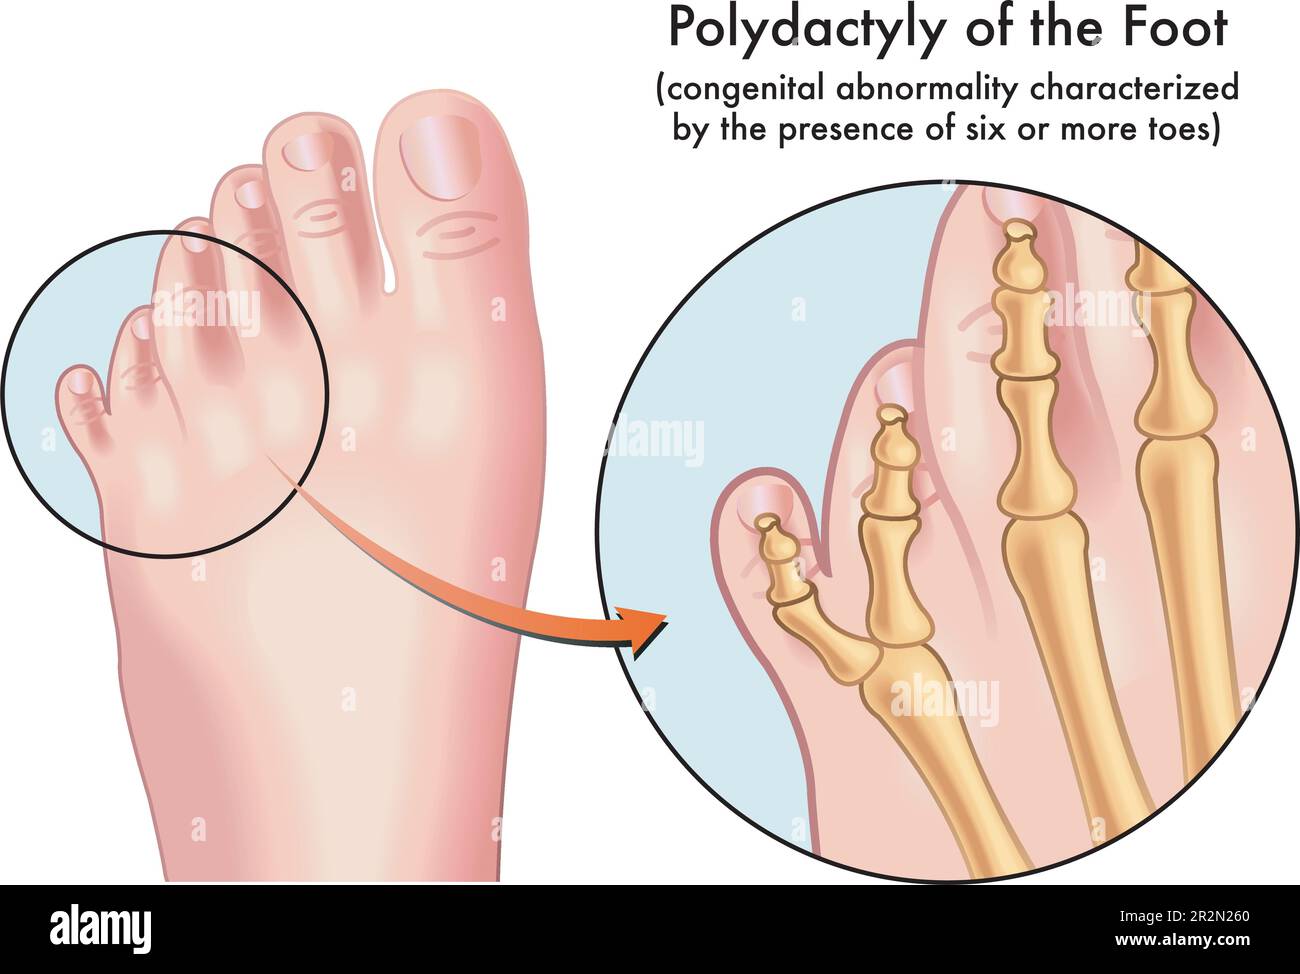 Medical illustration of a foot afflicted with Polydactyly, a congenital abnormality characterized by the presence of six or more toes, with annotation Stock Vector